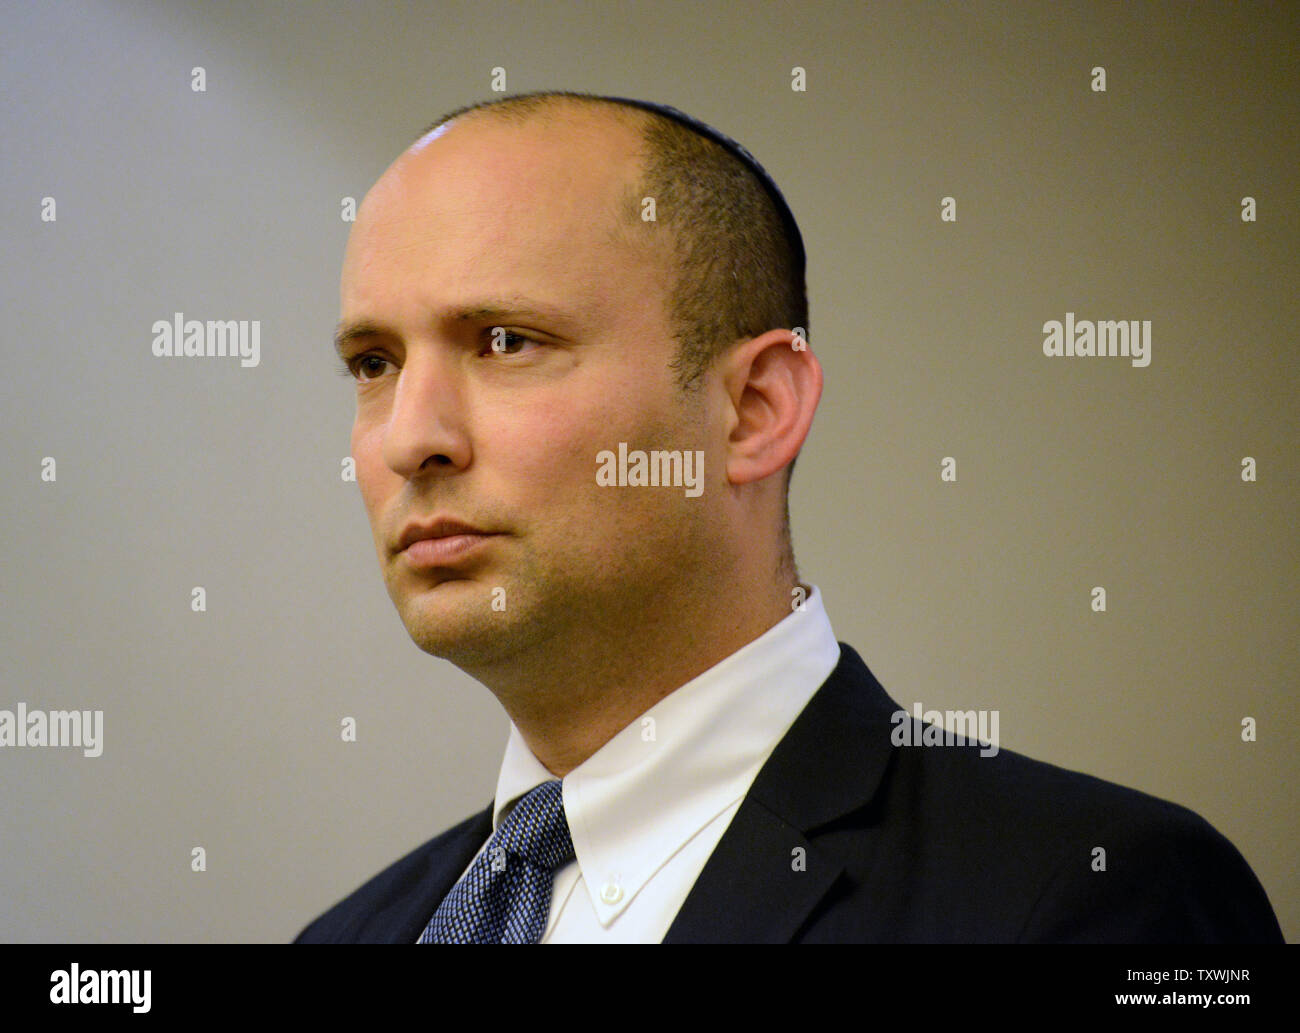 Israeli Minister of Economic Affairs and head of the far-right Bayit Yehudi, or Jewish Home Party, Naftali Bennett addresses the Foreign Press Association, which represents the international news media in Israel, at the King David Hotel in Jerusalem, April 27, 2014. Bennett said the Oslo era is ending and that he favors a brand of Palestinian self-rule that falls short of full-fledged statehood.   UPI/Debbie Hill Stock Photo